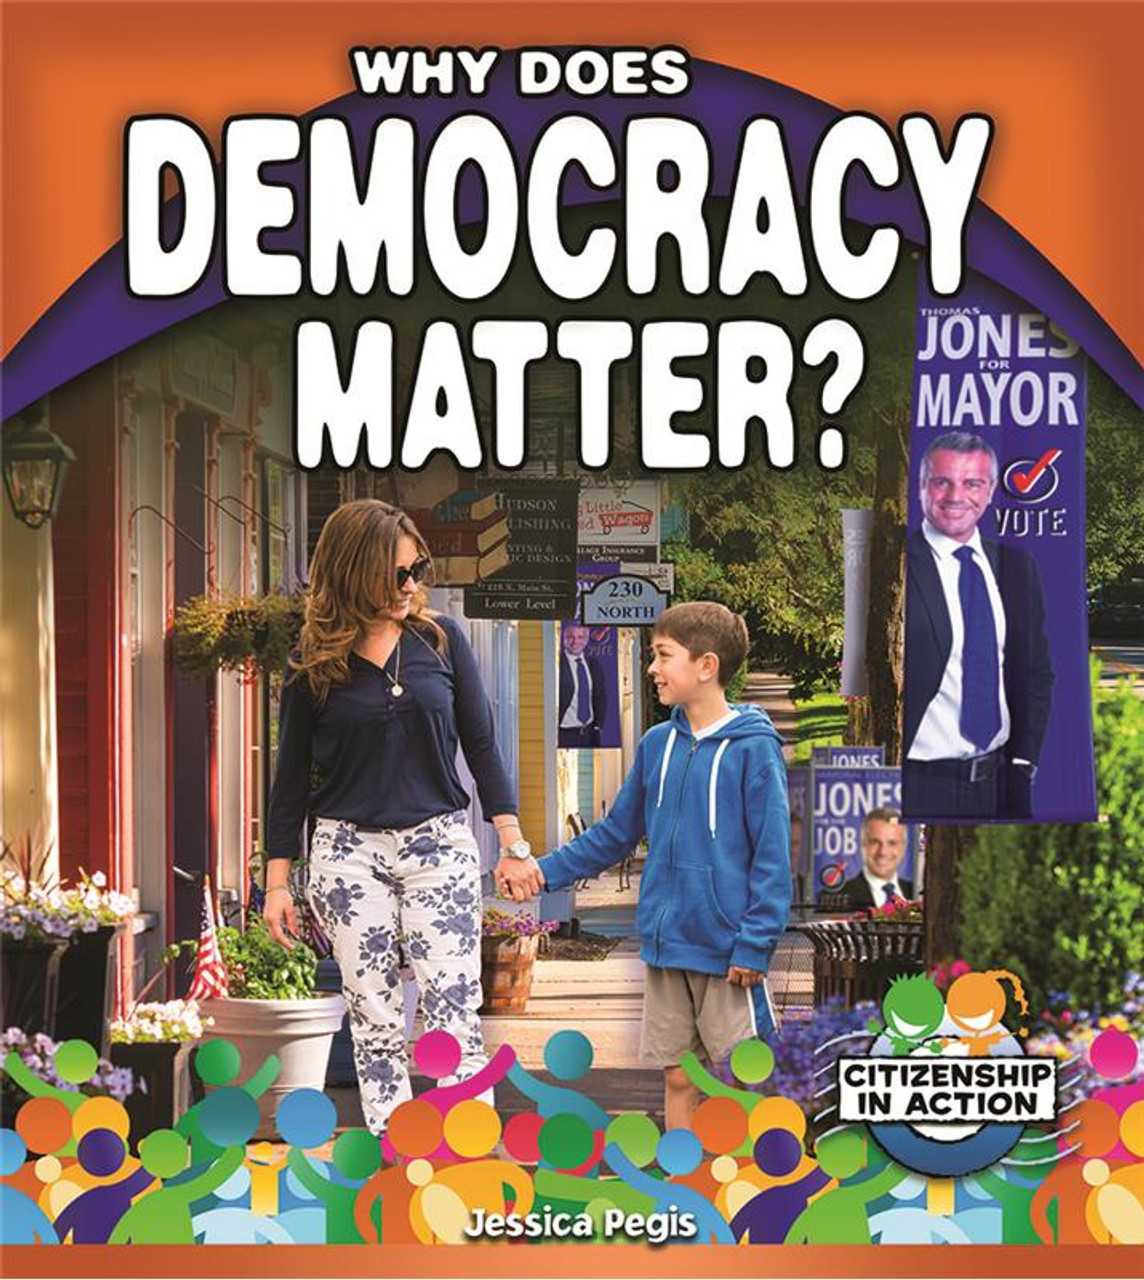 Why does Democracy Matter? by Jessica Pegis